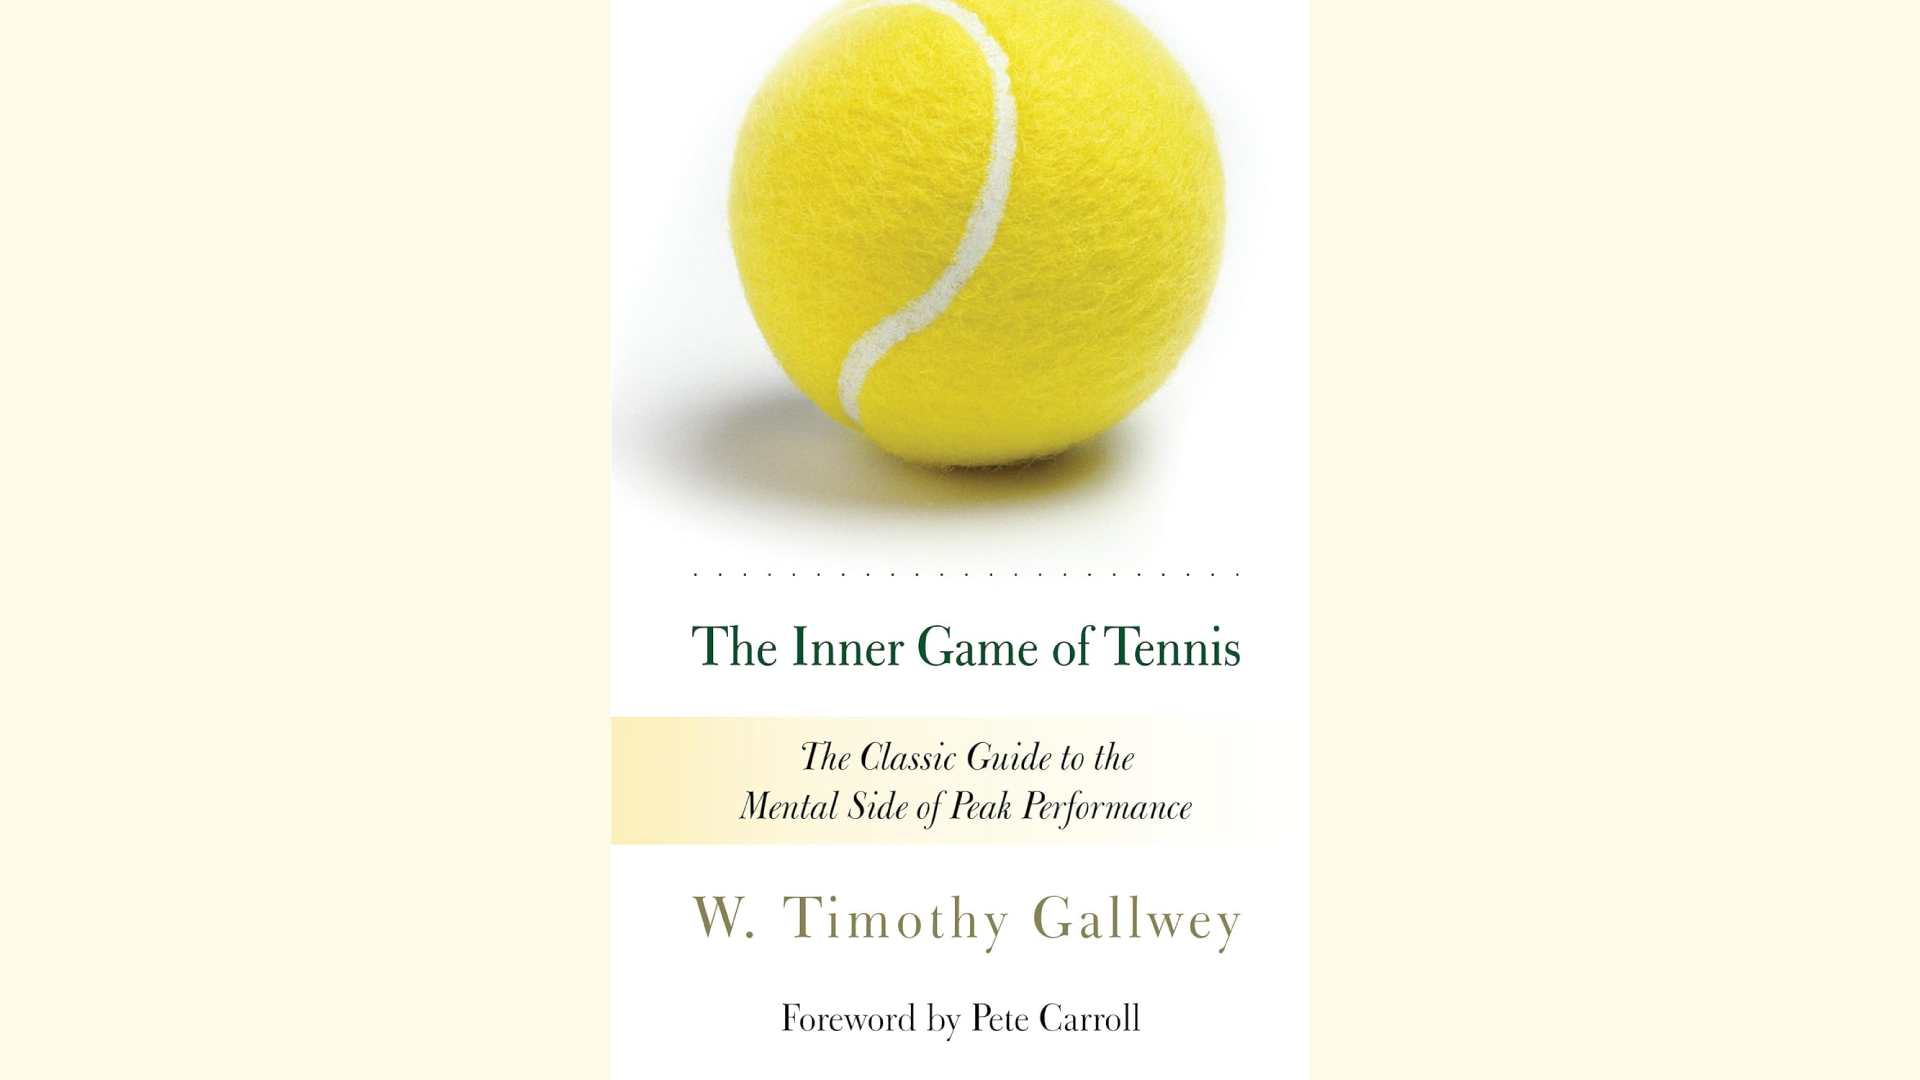 Summary: Inner Game of Tennis by Timothy Gallwey